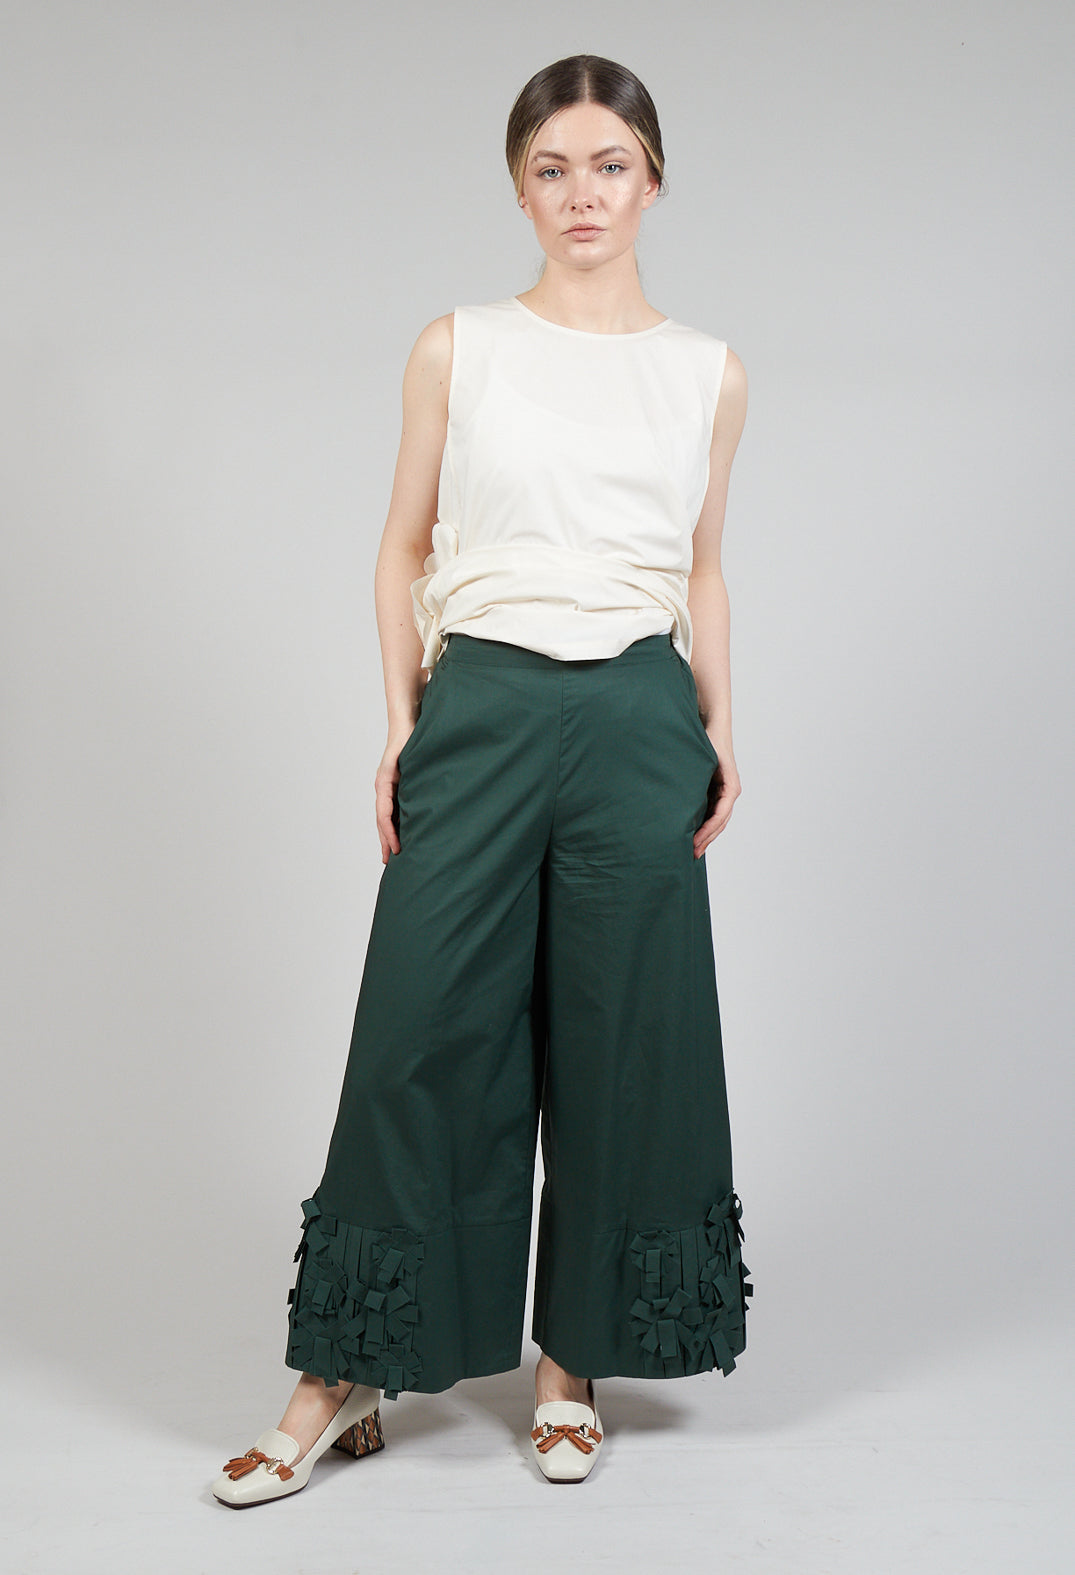 Fabric Embellished Hemmed Trousers in Green